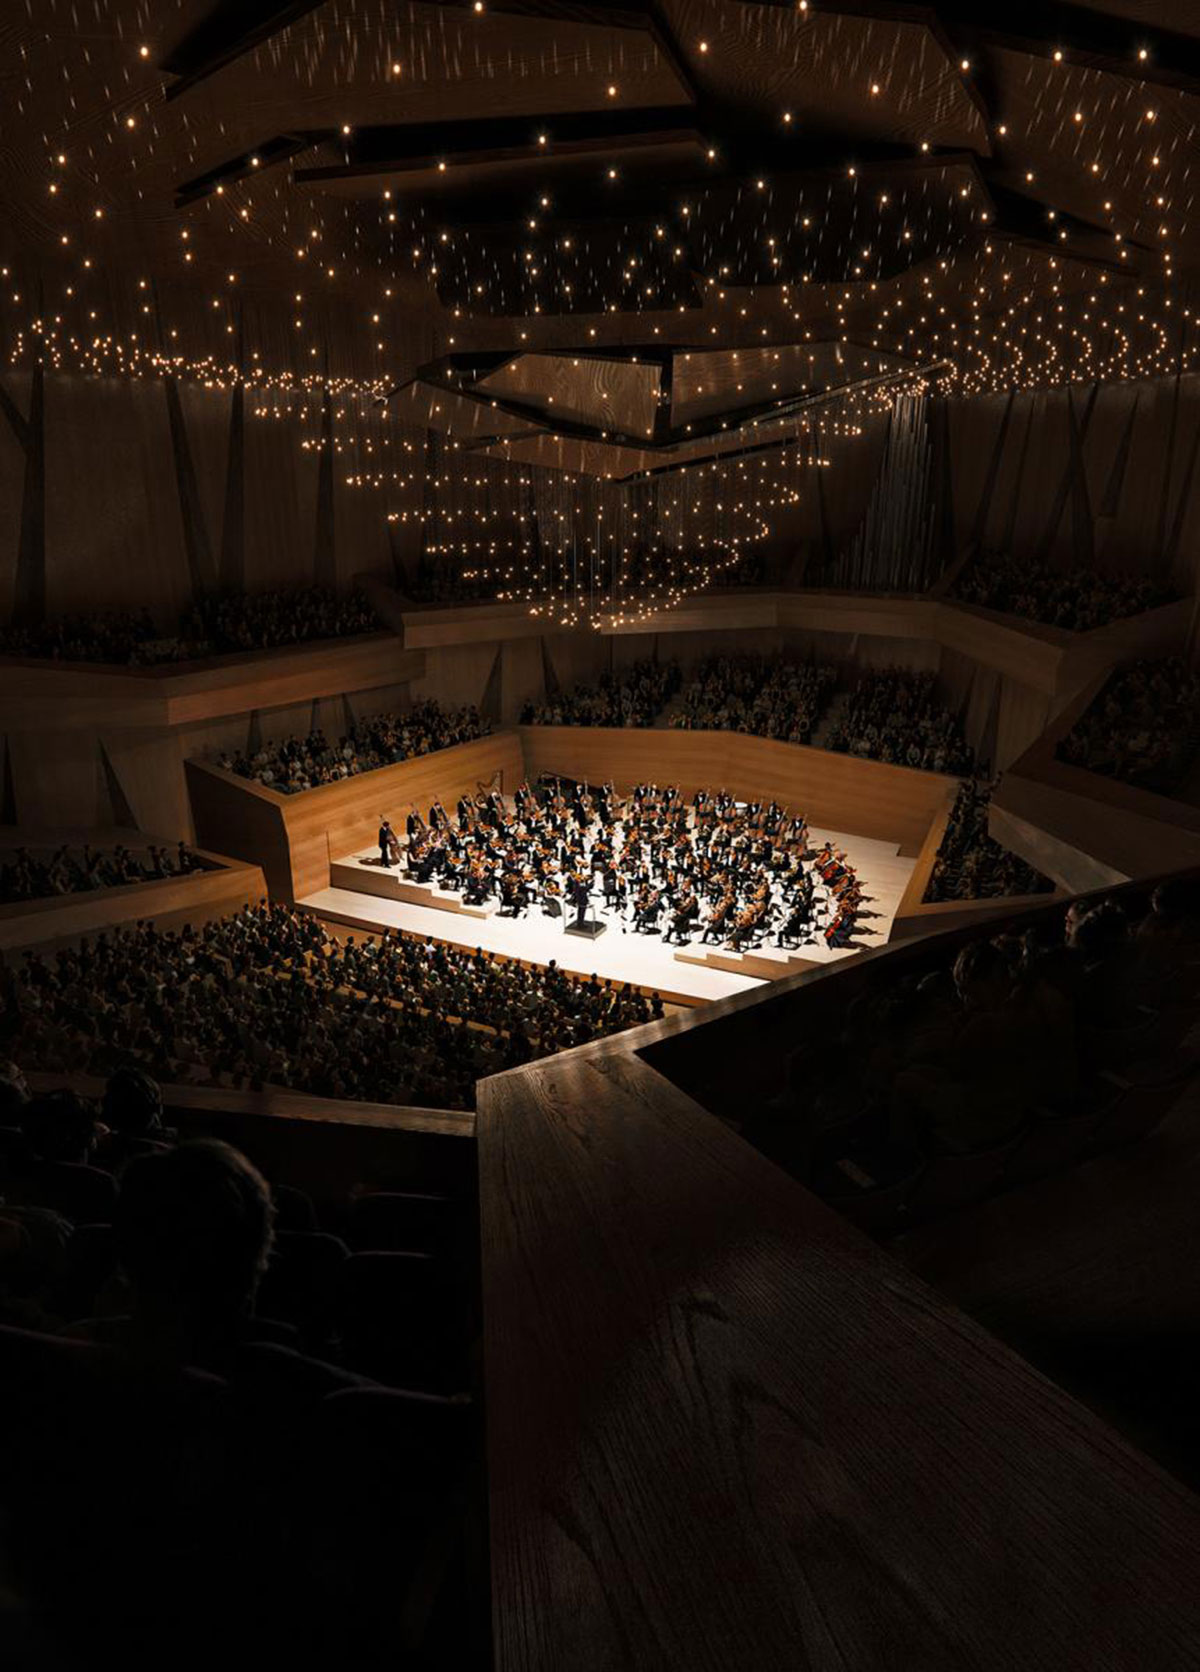 Bjarke Ingels Group (BIG) wins international architectural competition for the design of the Vltava Philharmonic Hall